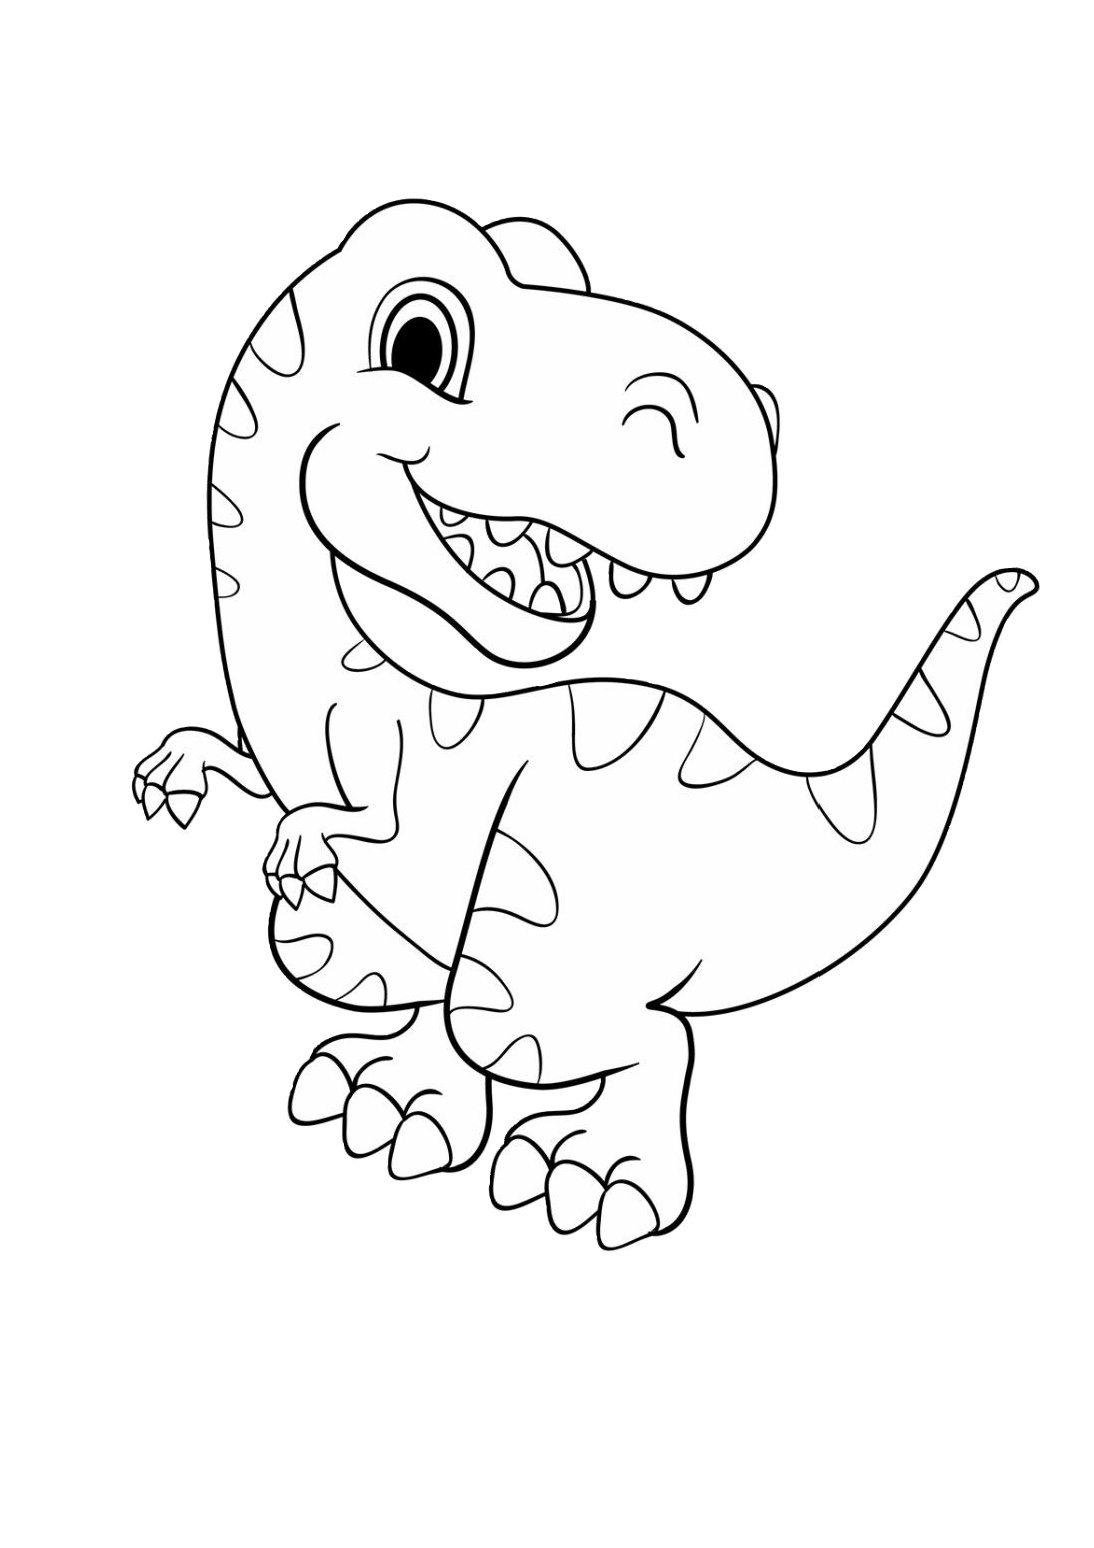 Download Dinosaur Coloring Pages (Updated): Printable PDF » Print Color Craft